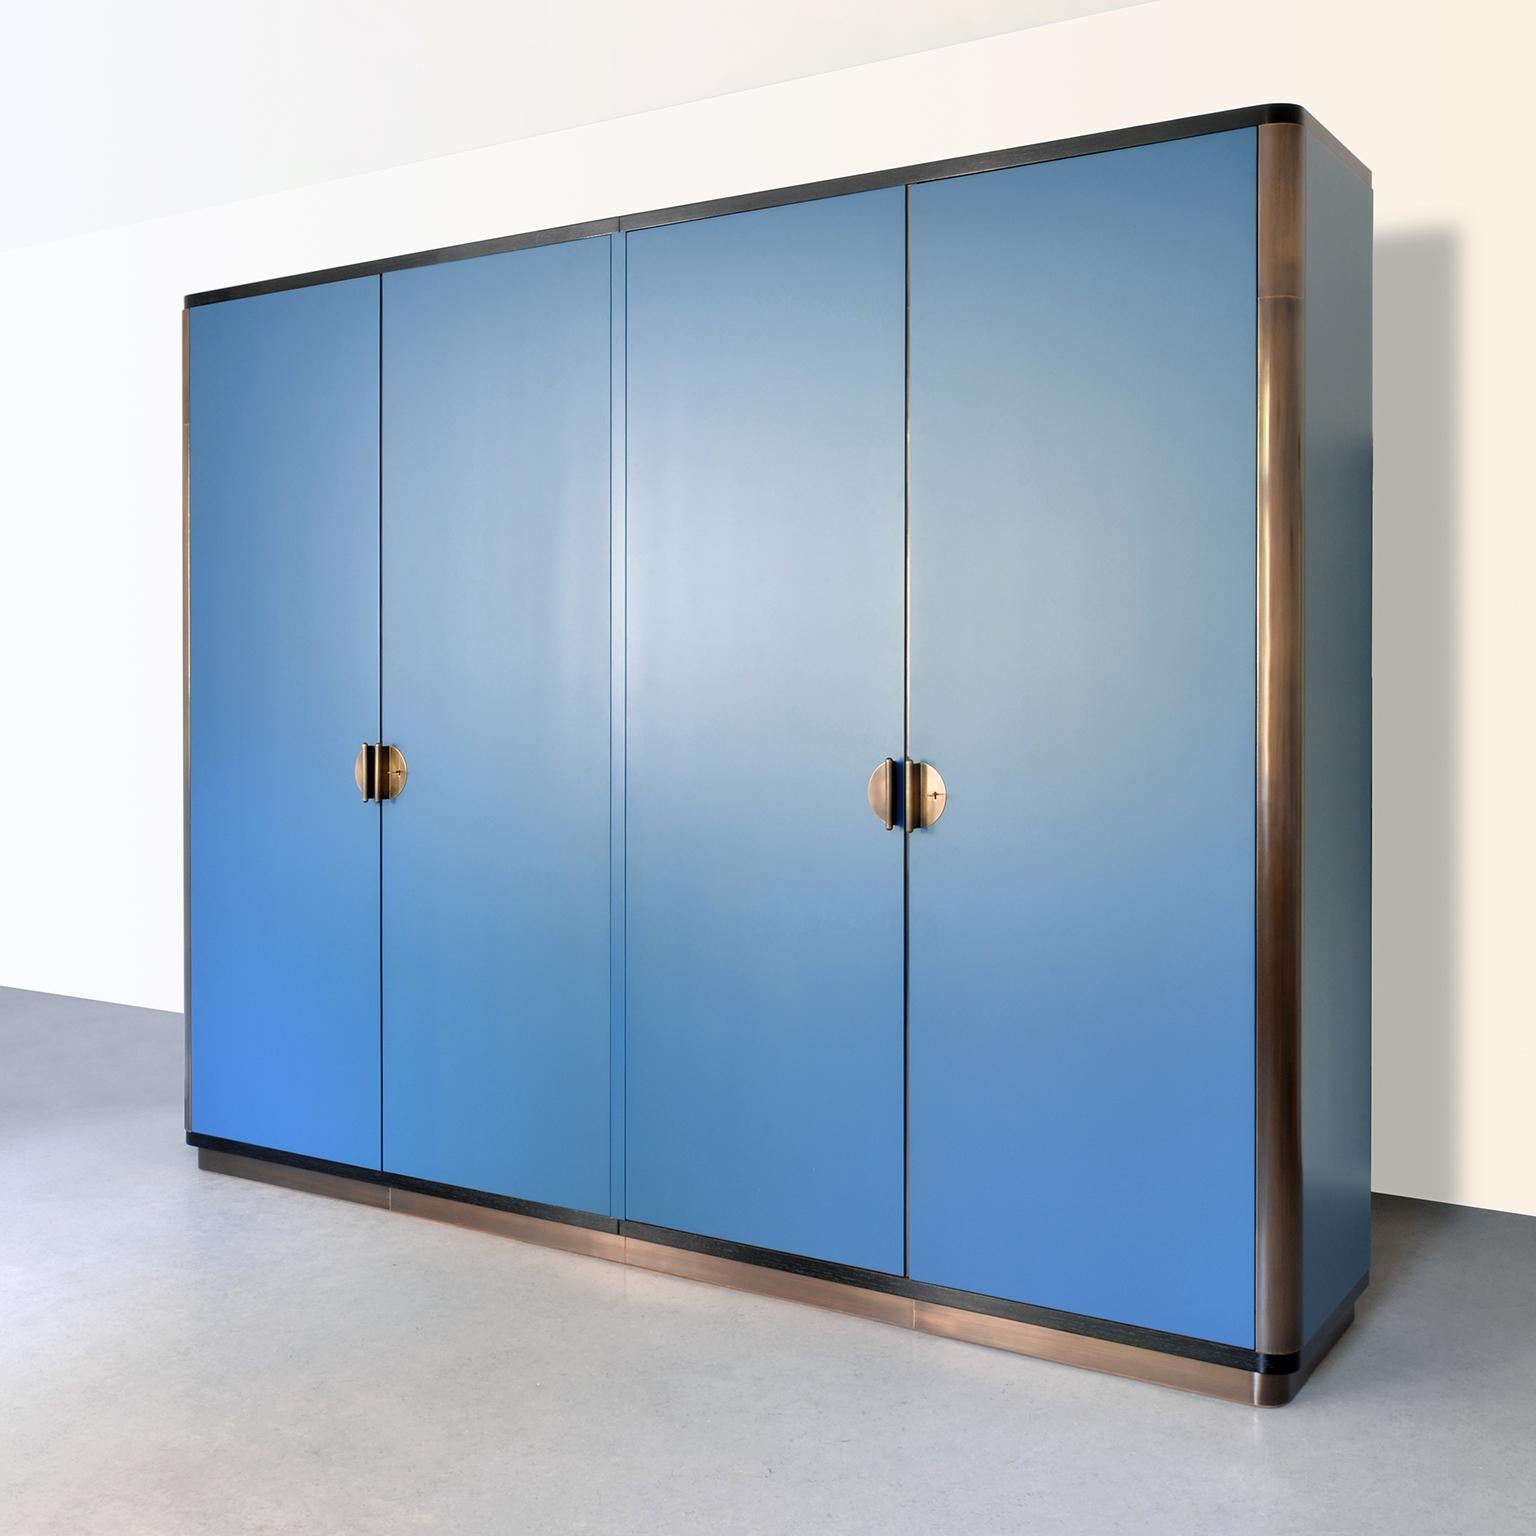 Customized four-door wardrobe, manufactured by GMD Berlin, exclusively presented in our Rudolf Vichr Collection.

These high-quality, handmade furniture in a classic modern timeless design, are made from selected materials according to traditional